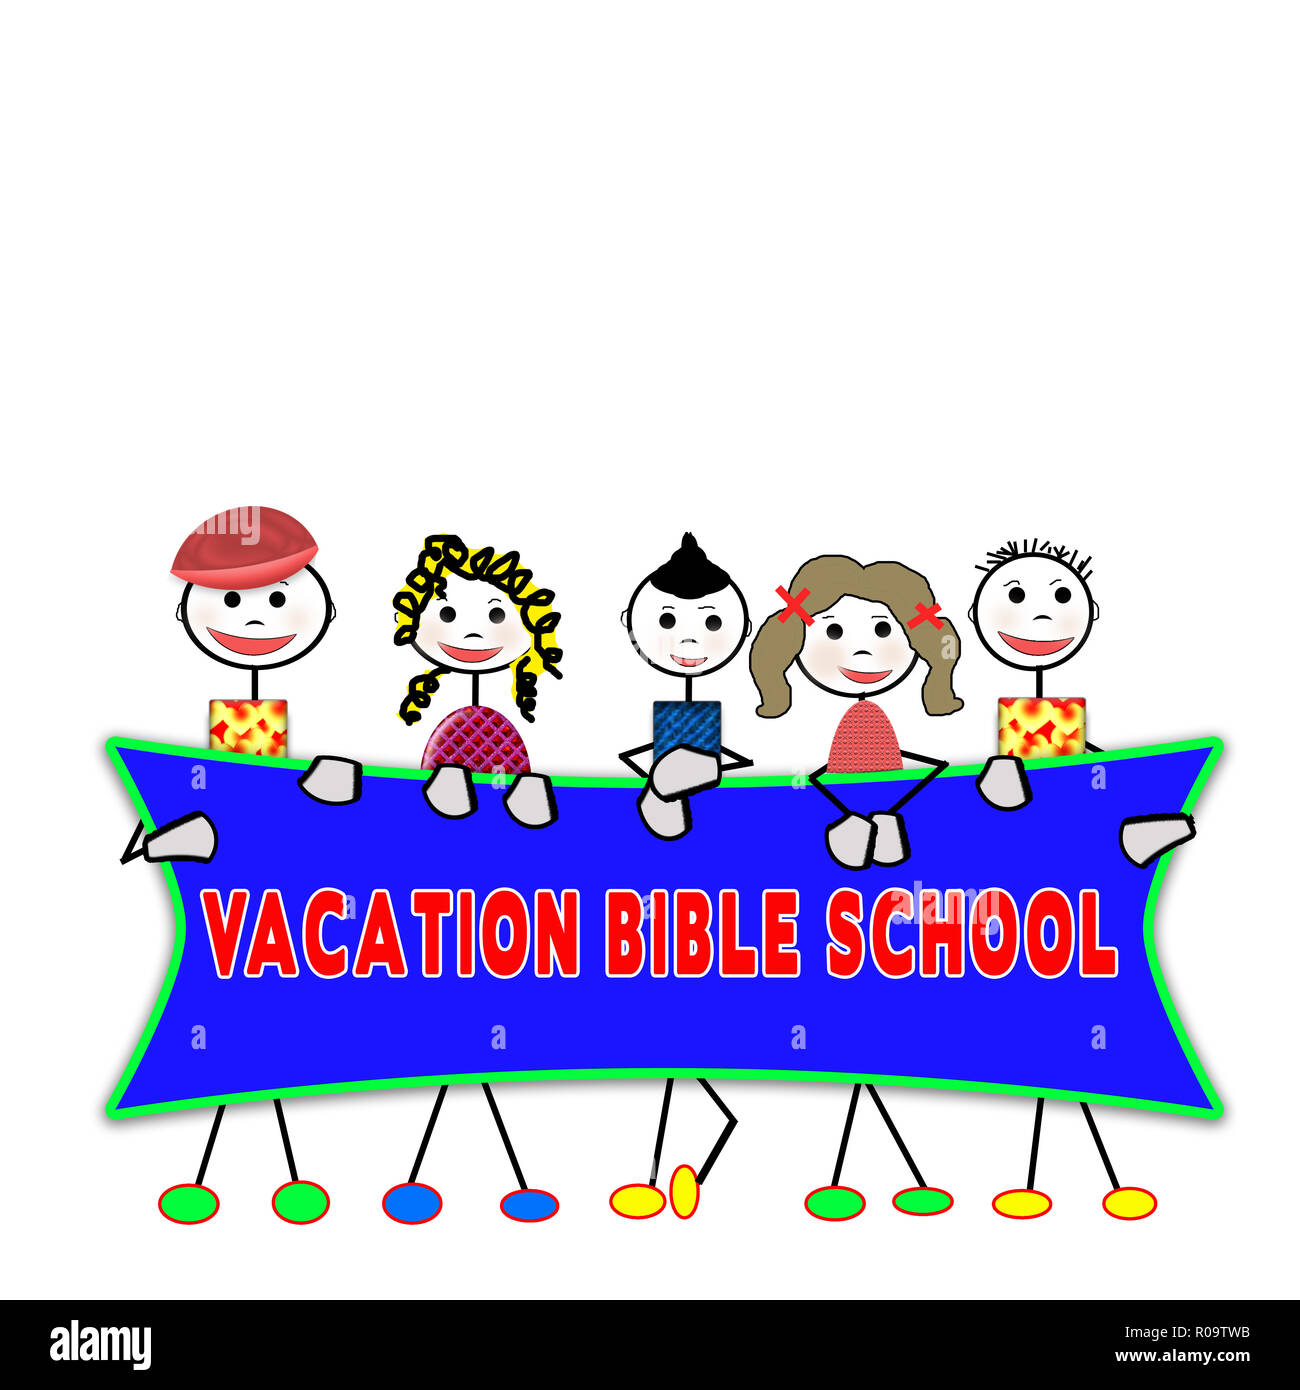 Graphic Illustrations and backgrounds for Vacation Bible School.  Children standing by banner advertising school. One image has large mix-matched text Stock Photo